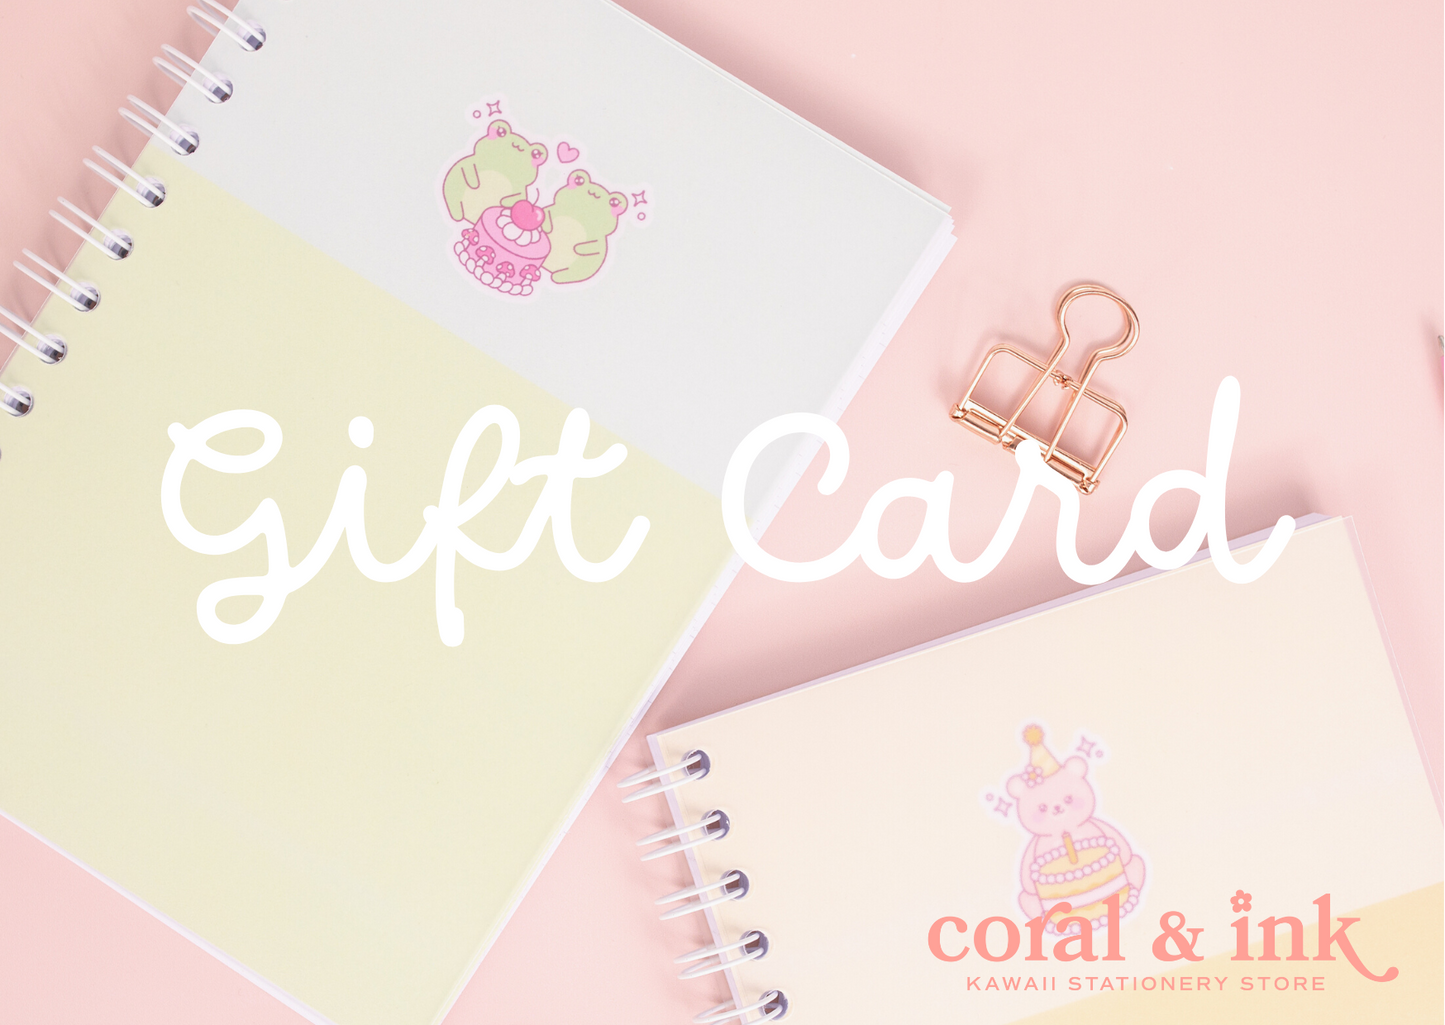 Coral & Ink Gift Card